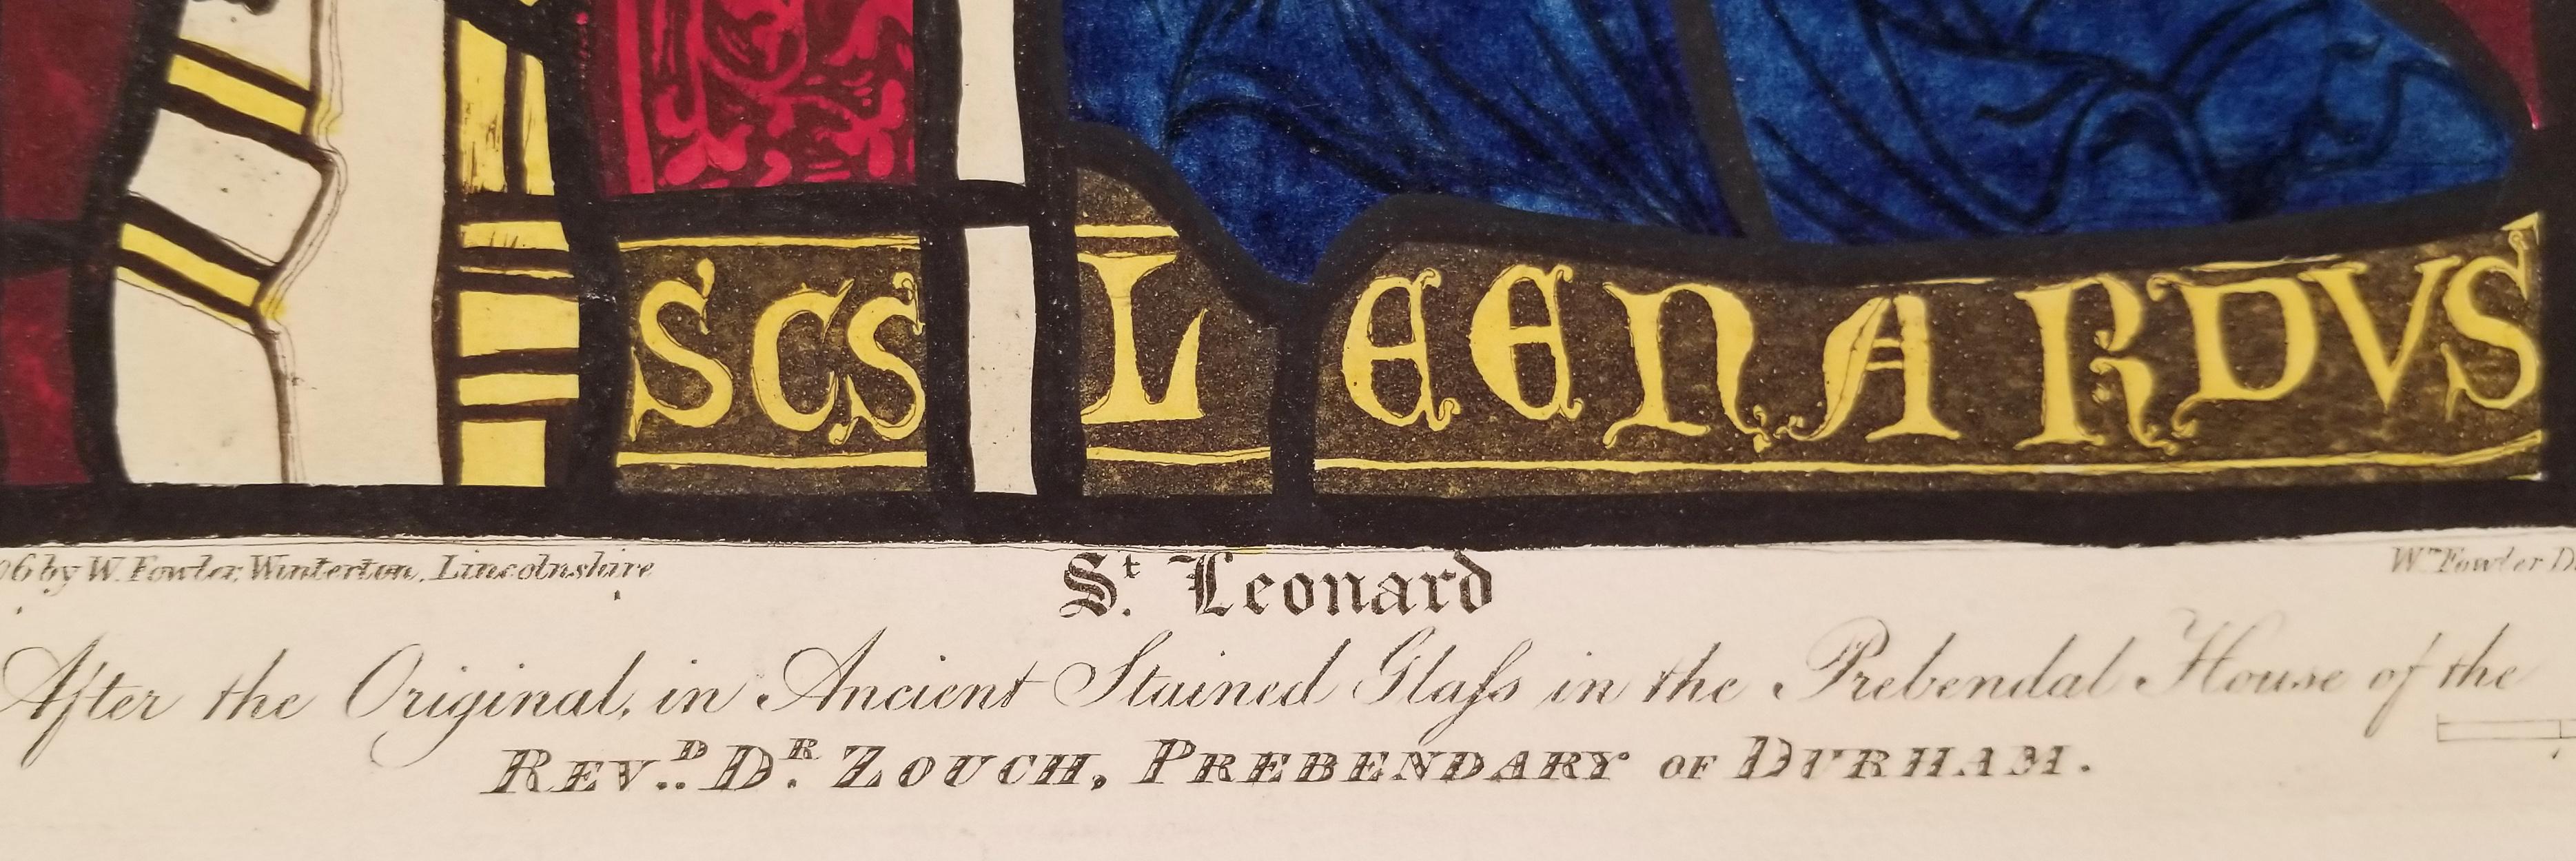 Original hand-colored engraving, engraved and published by William Fowler in 1806 depicting St. Leonard in stained glass in the Prebendal House of the Reverend De Zouch.

The title reads: 